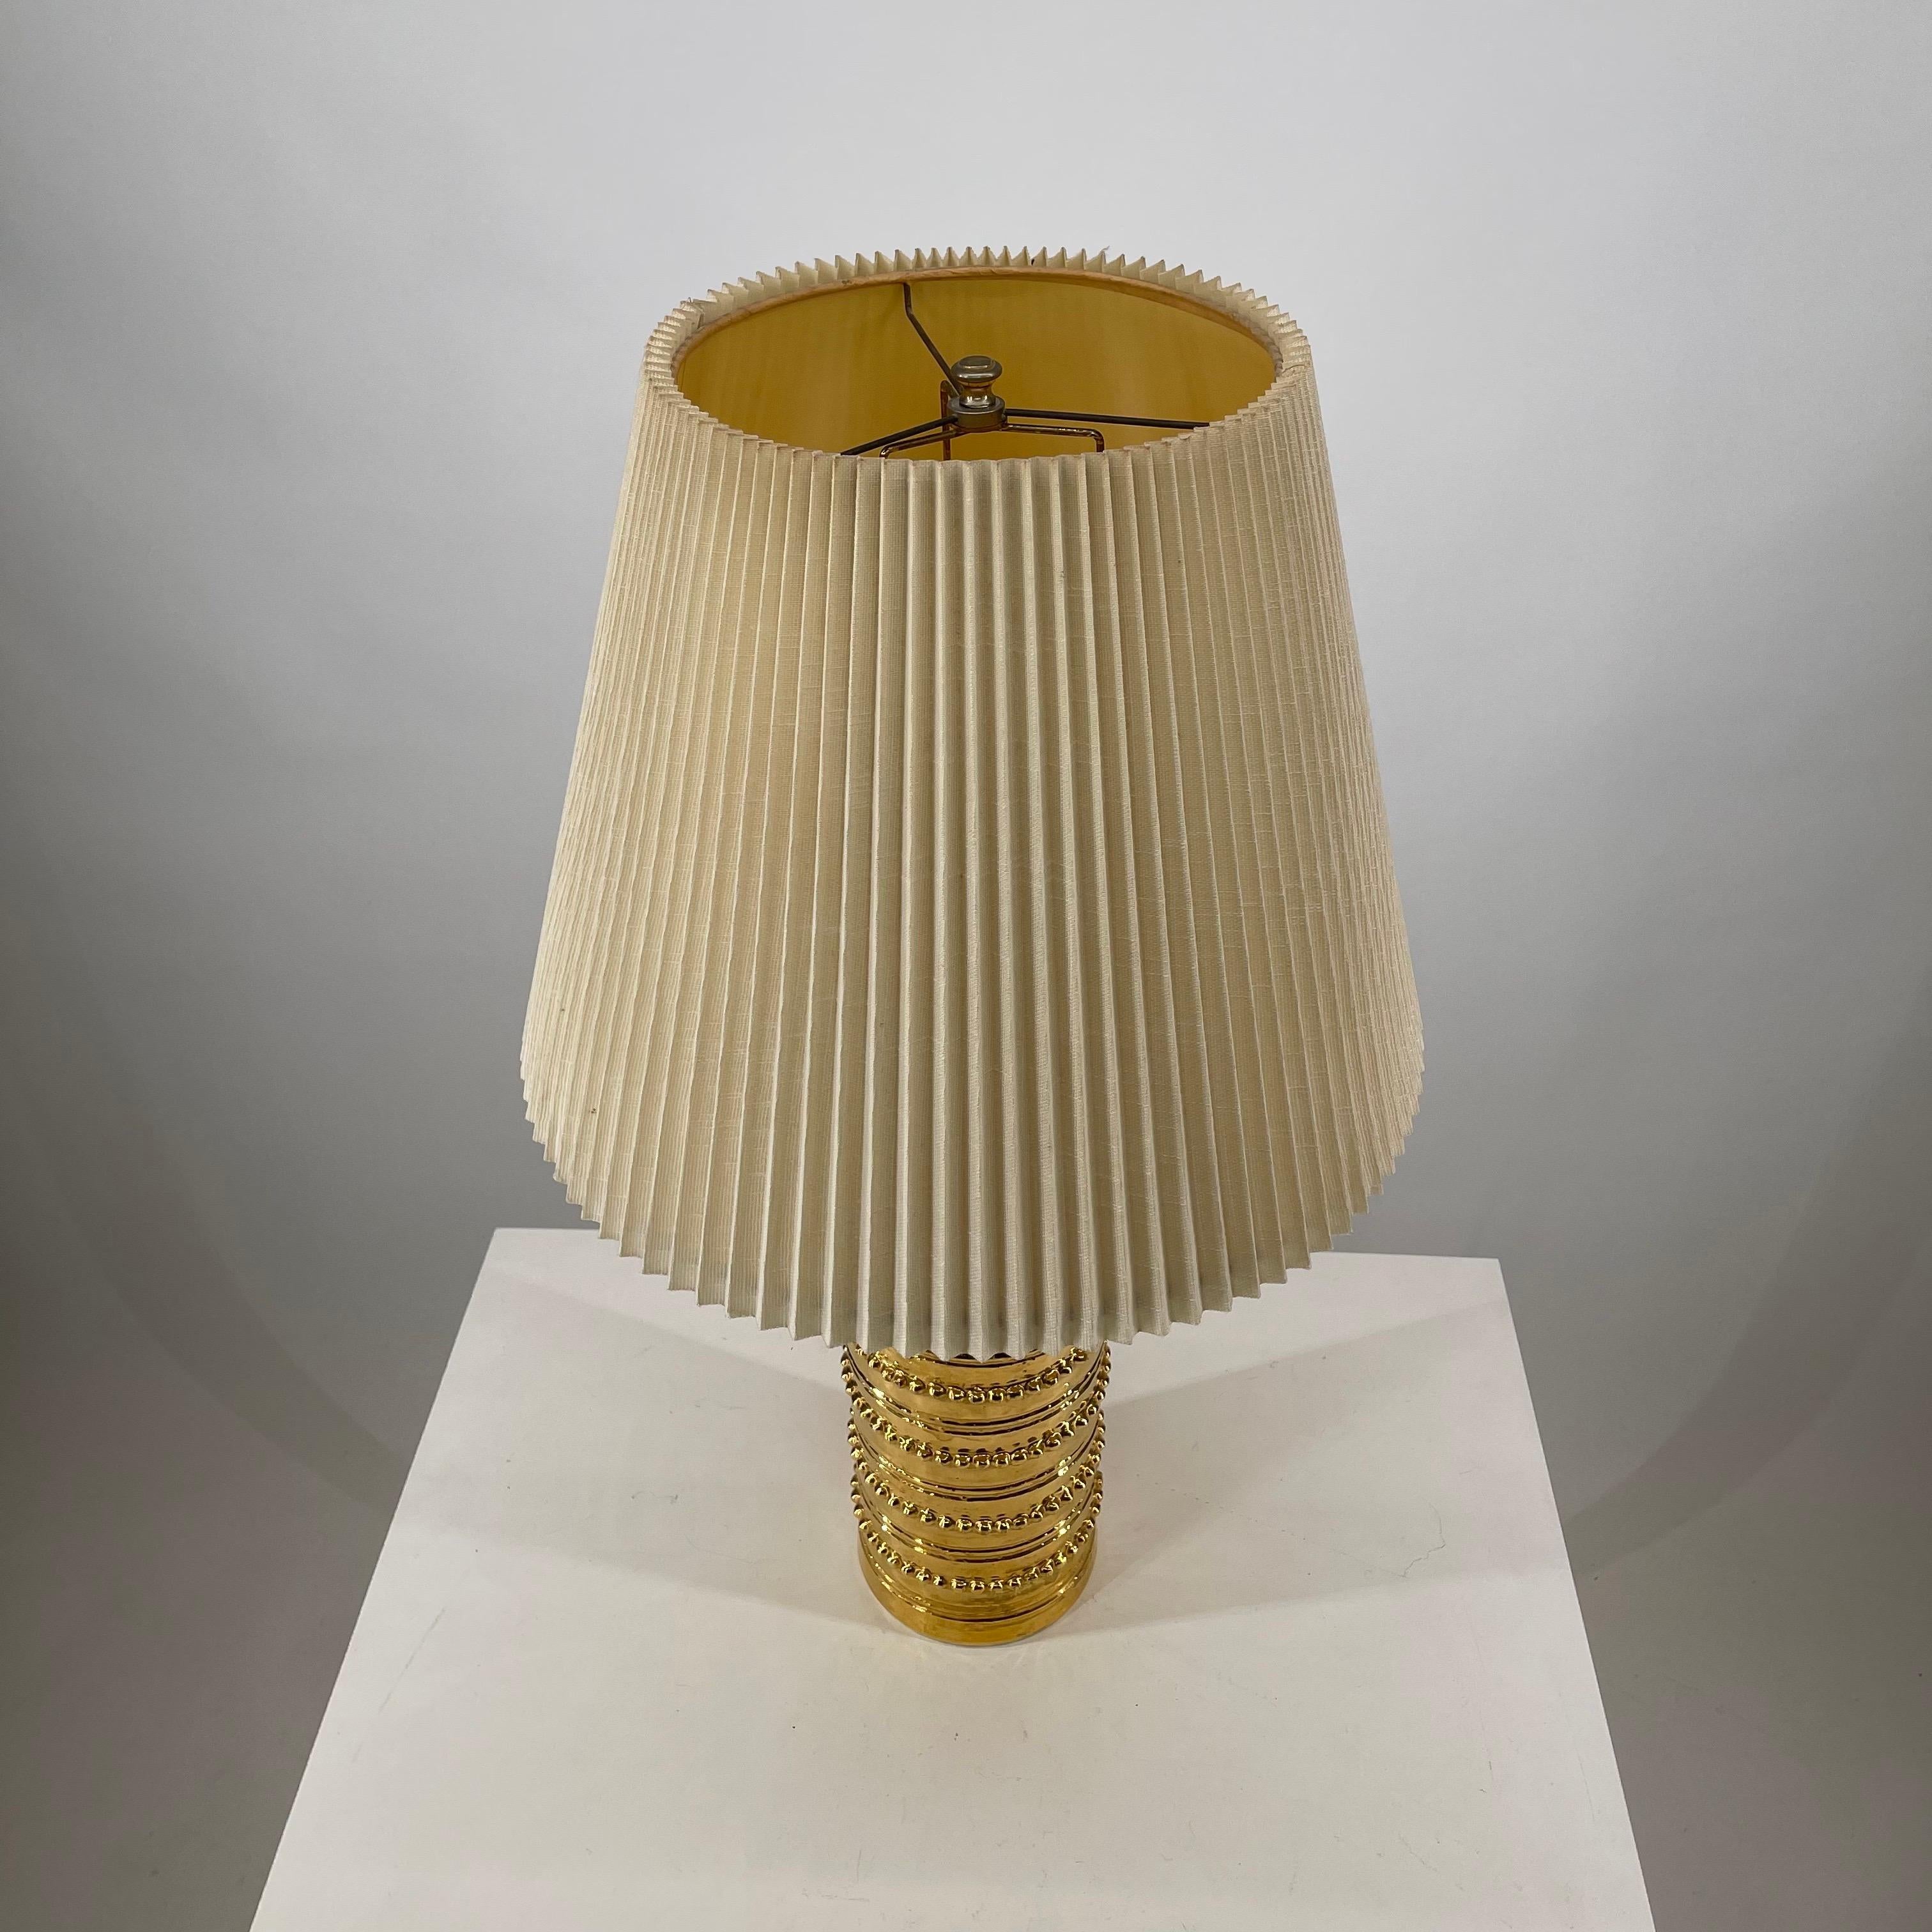 1 of 3 Bitossi Gold Glazed Ceramic Table Lamp by Miranda of Sweden, 1965 In Good Condition For Sale In Vienna, AT